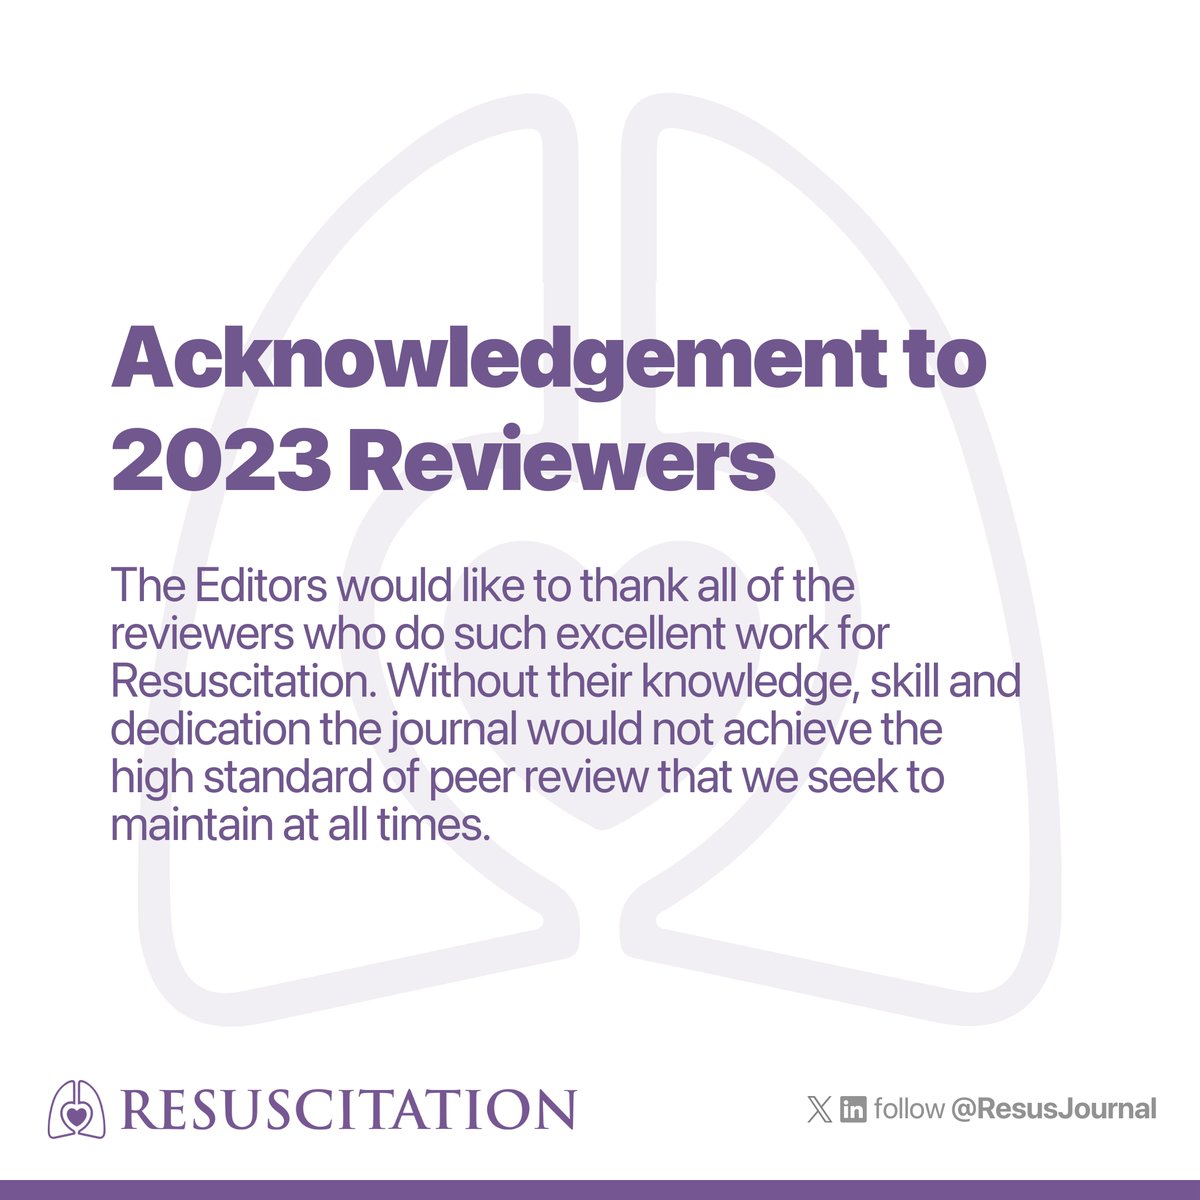 The Editors would like to thank all of the reviewers who do such excellent work for #Resuscitation. Without their knowledge, skill and dedication the journal would not achieve the high standard of peer review that we seek to maintain at all times. 🔗 resuscitationjournal.com/article/S0300-…